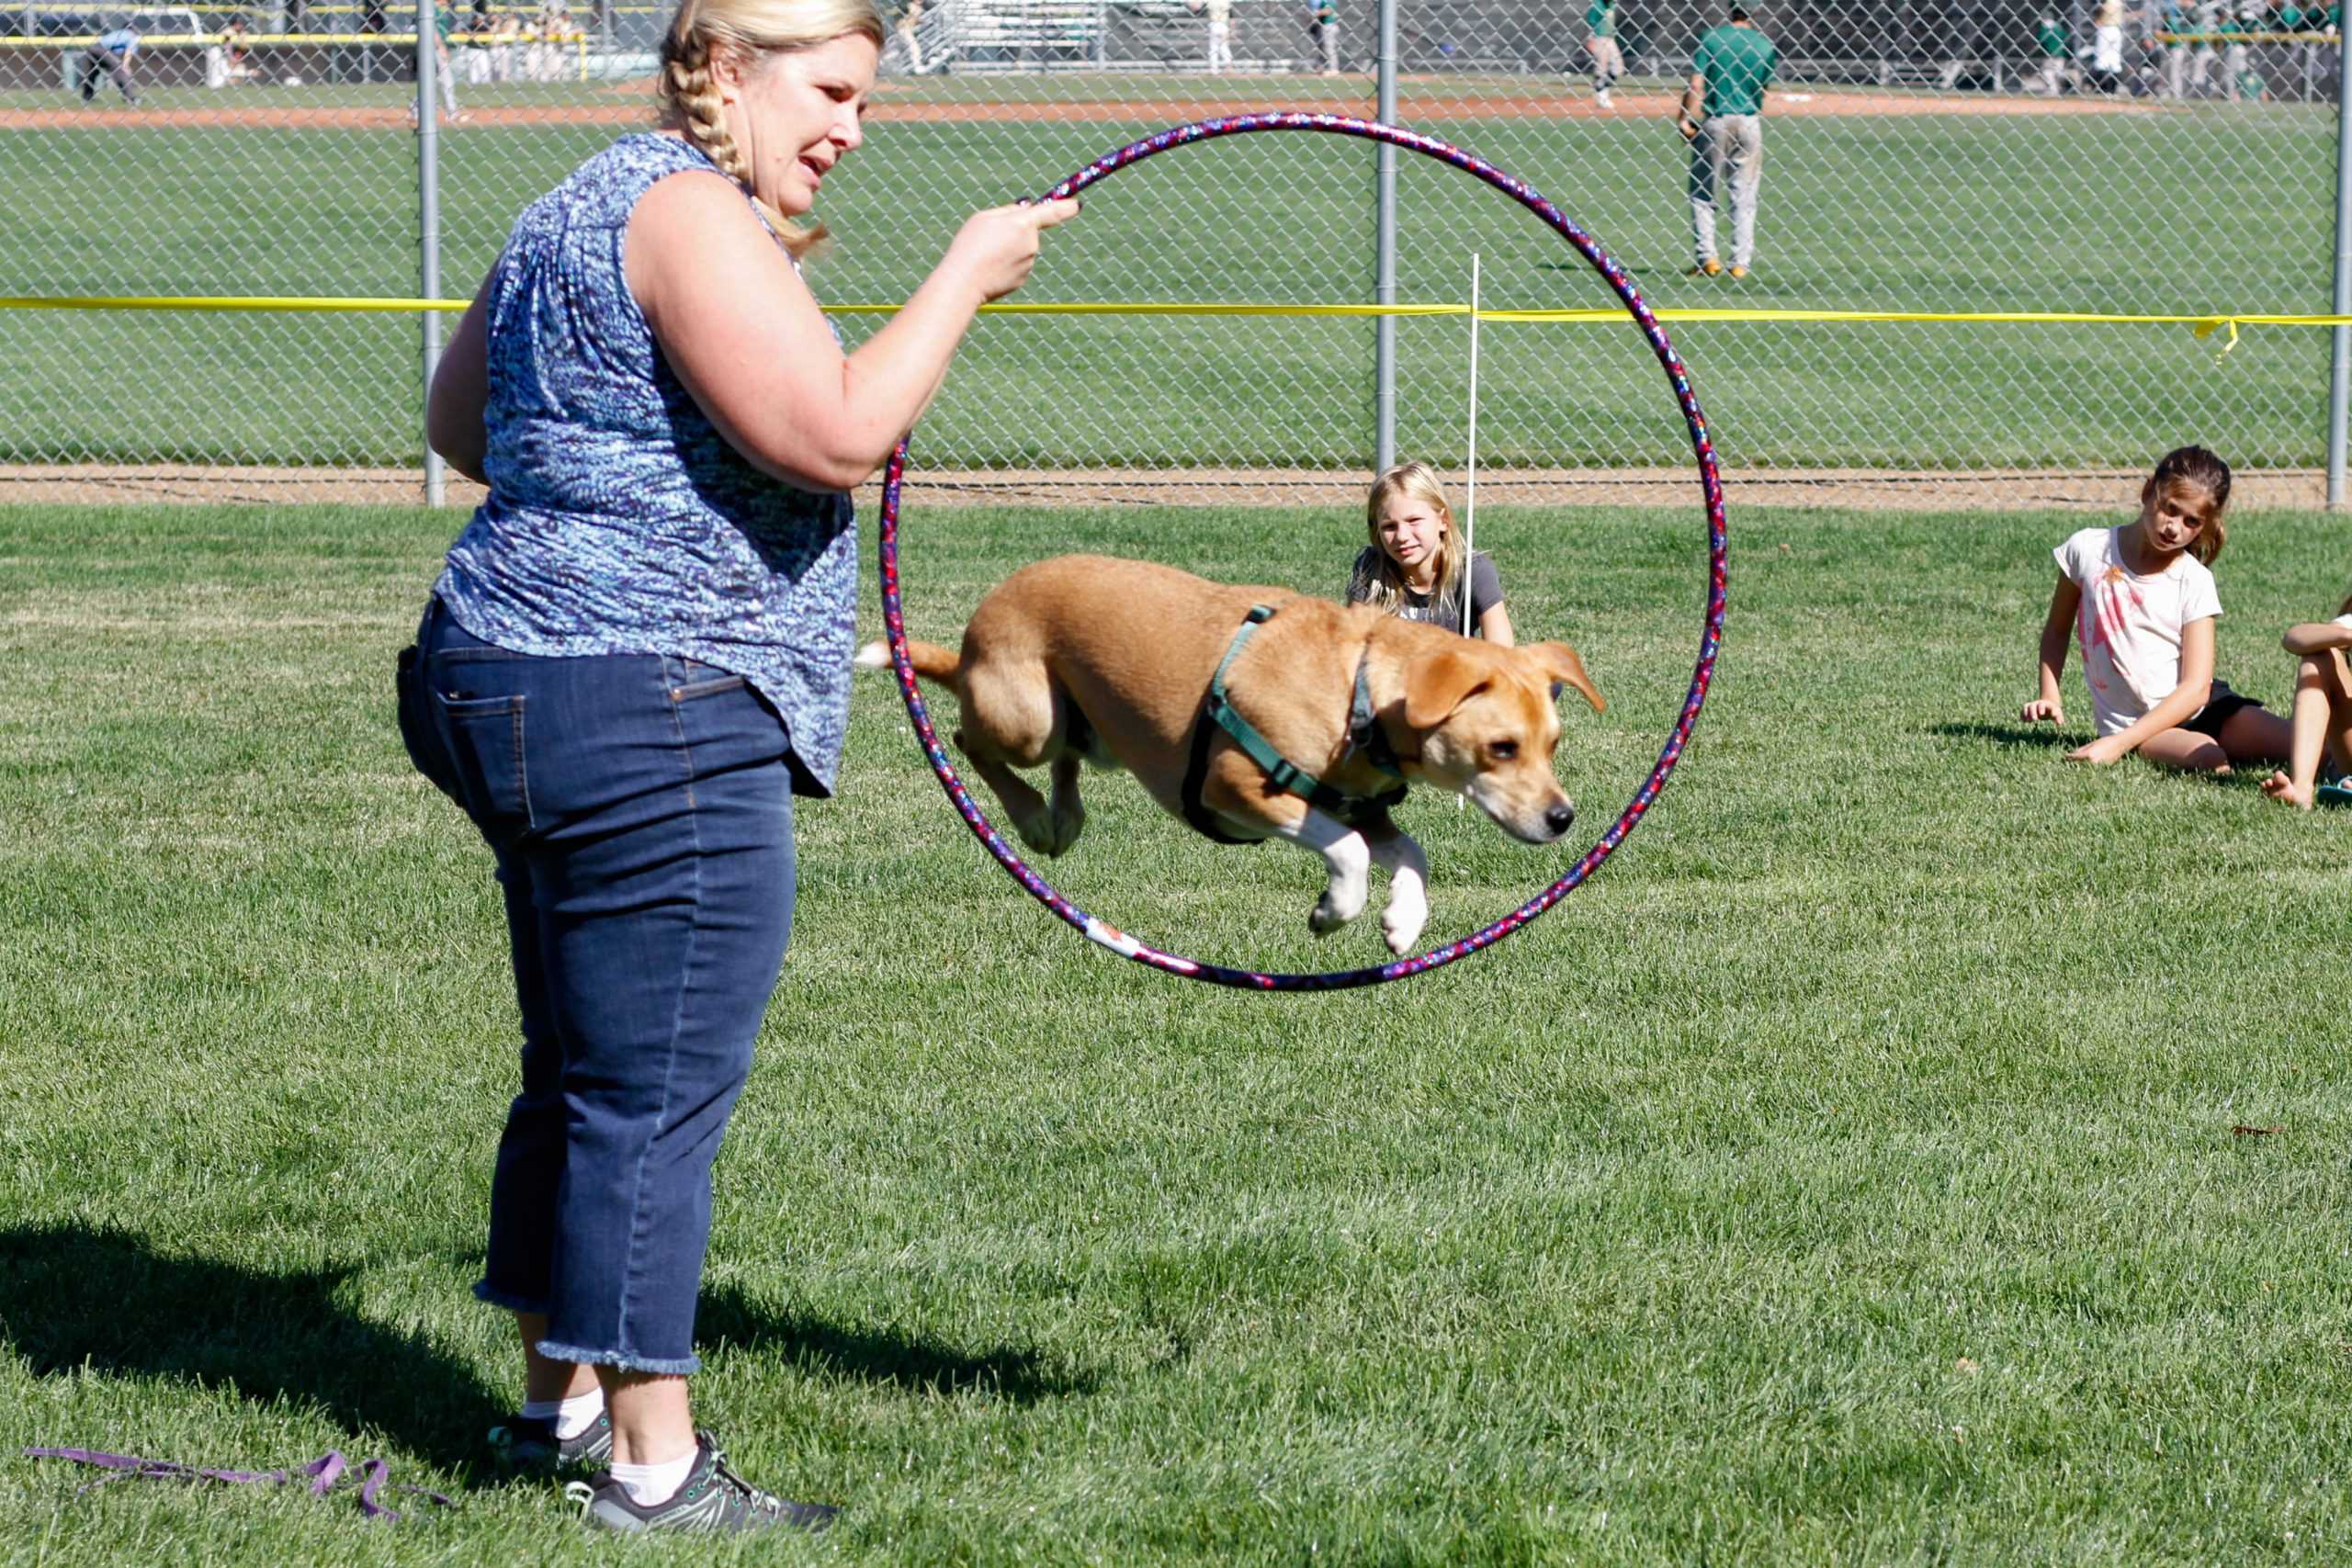 Fort+Collins+dogs+raise+money+for+community+at+23rd+annual+Doggie+Olympics